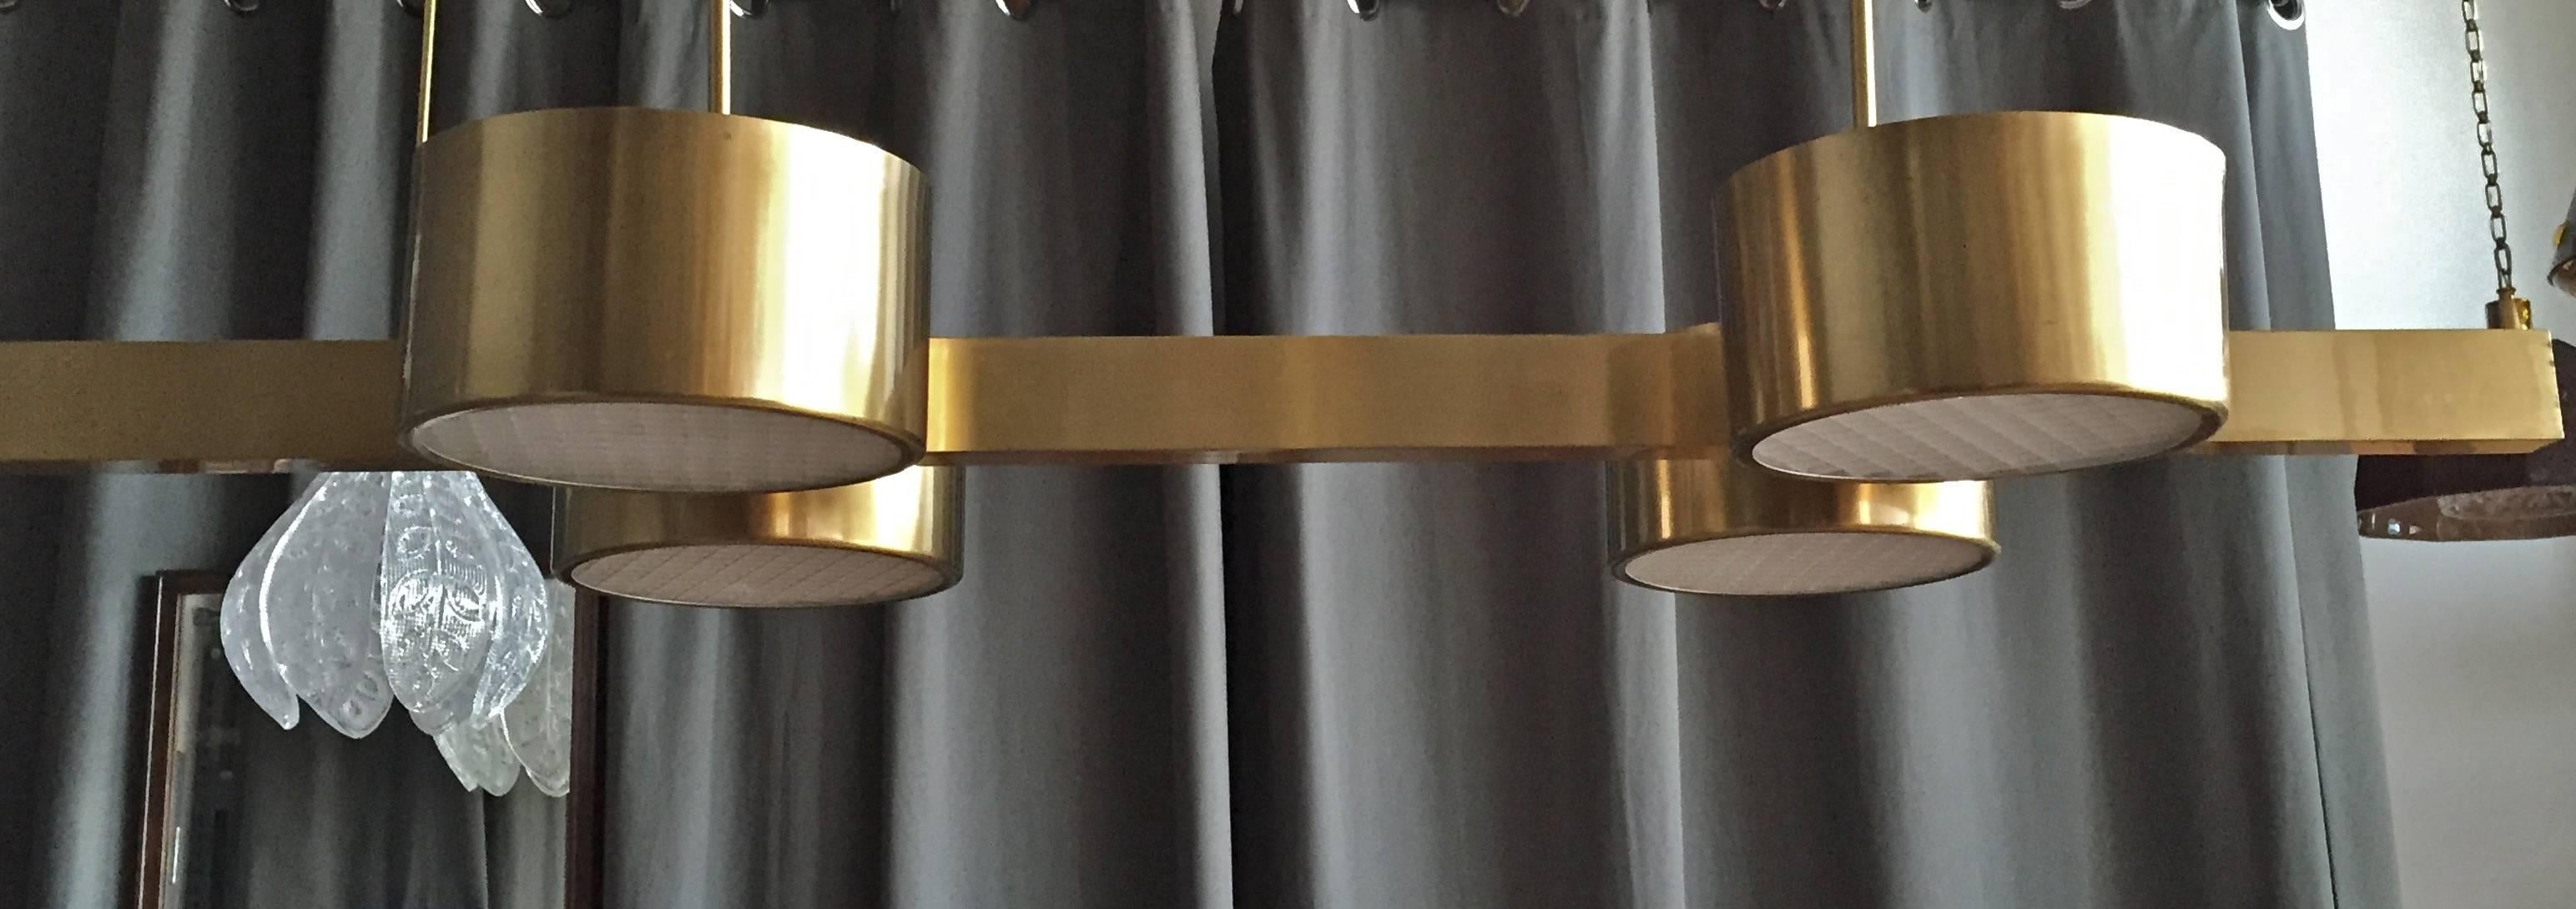 A chandelier designed by Hans-Agne Jakobsson, Sweden, 1970s.
Manufacturer label attached.
Four-light brass structure on two rod's, the shades with acrylic diffusers.
Polished and lacquered brass.
Measures: Height 34”, length 43”, depth 19